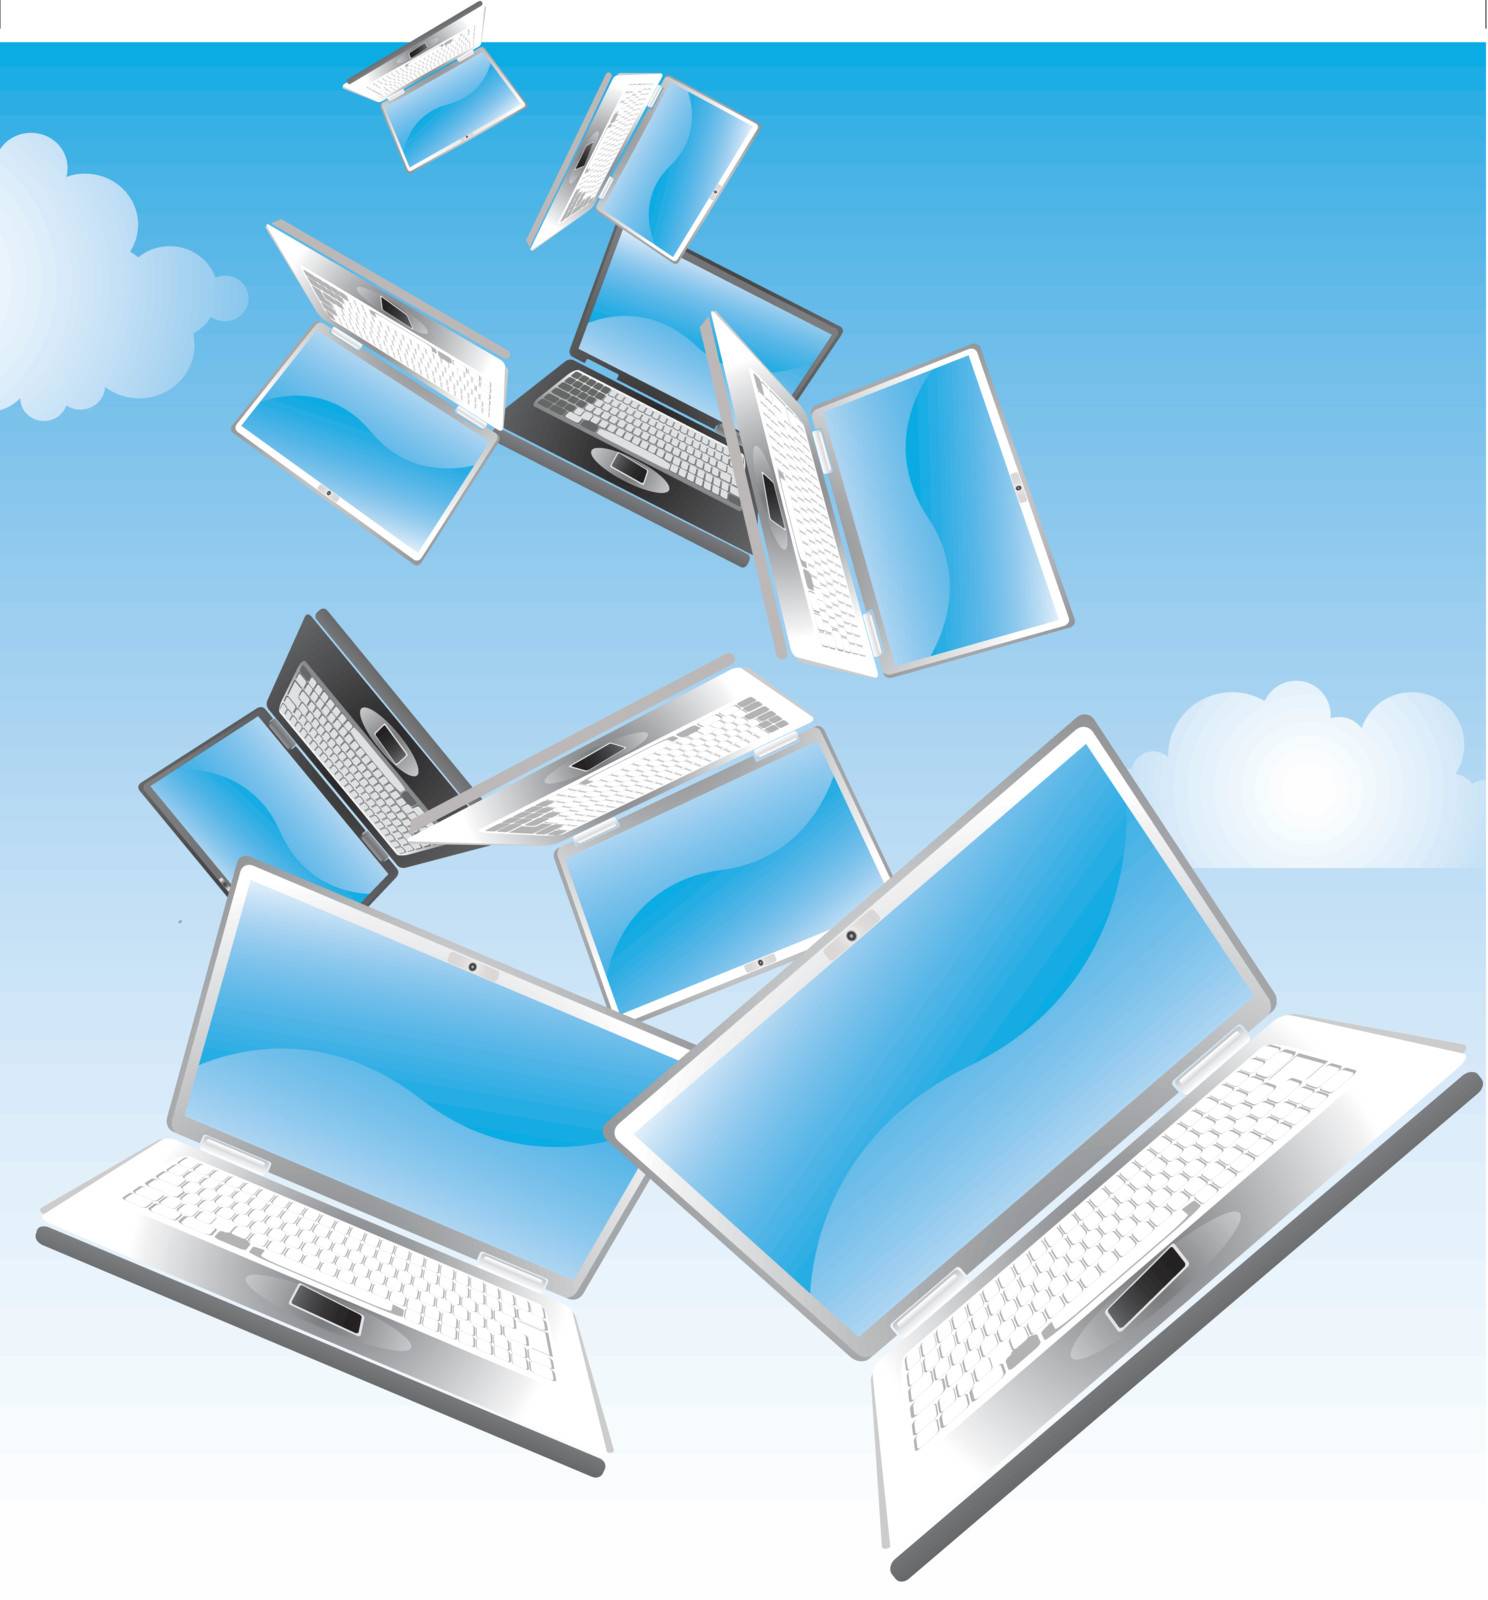 Illustration of various laptops falling from the sky